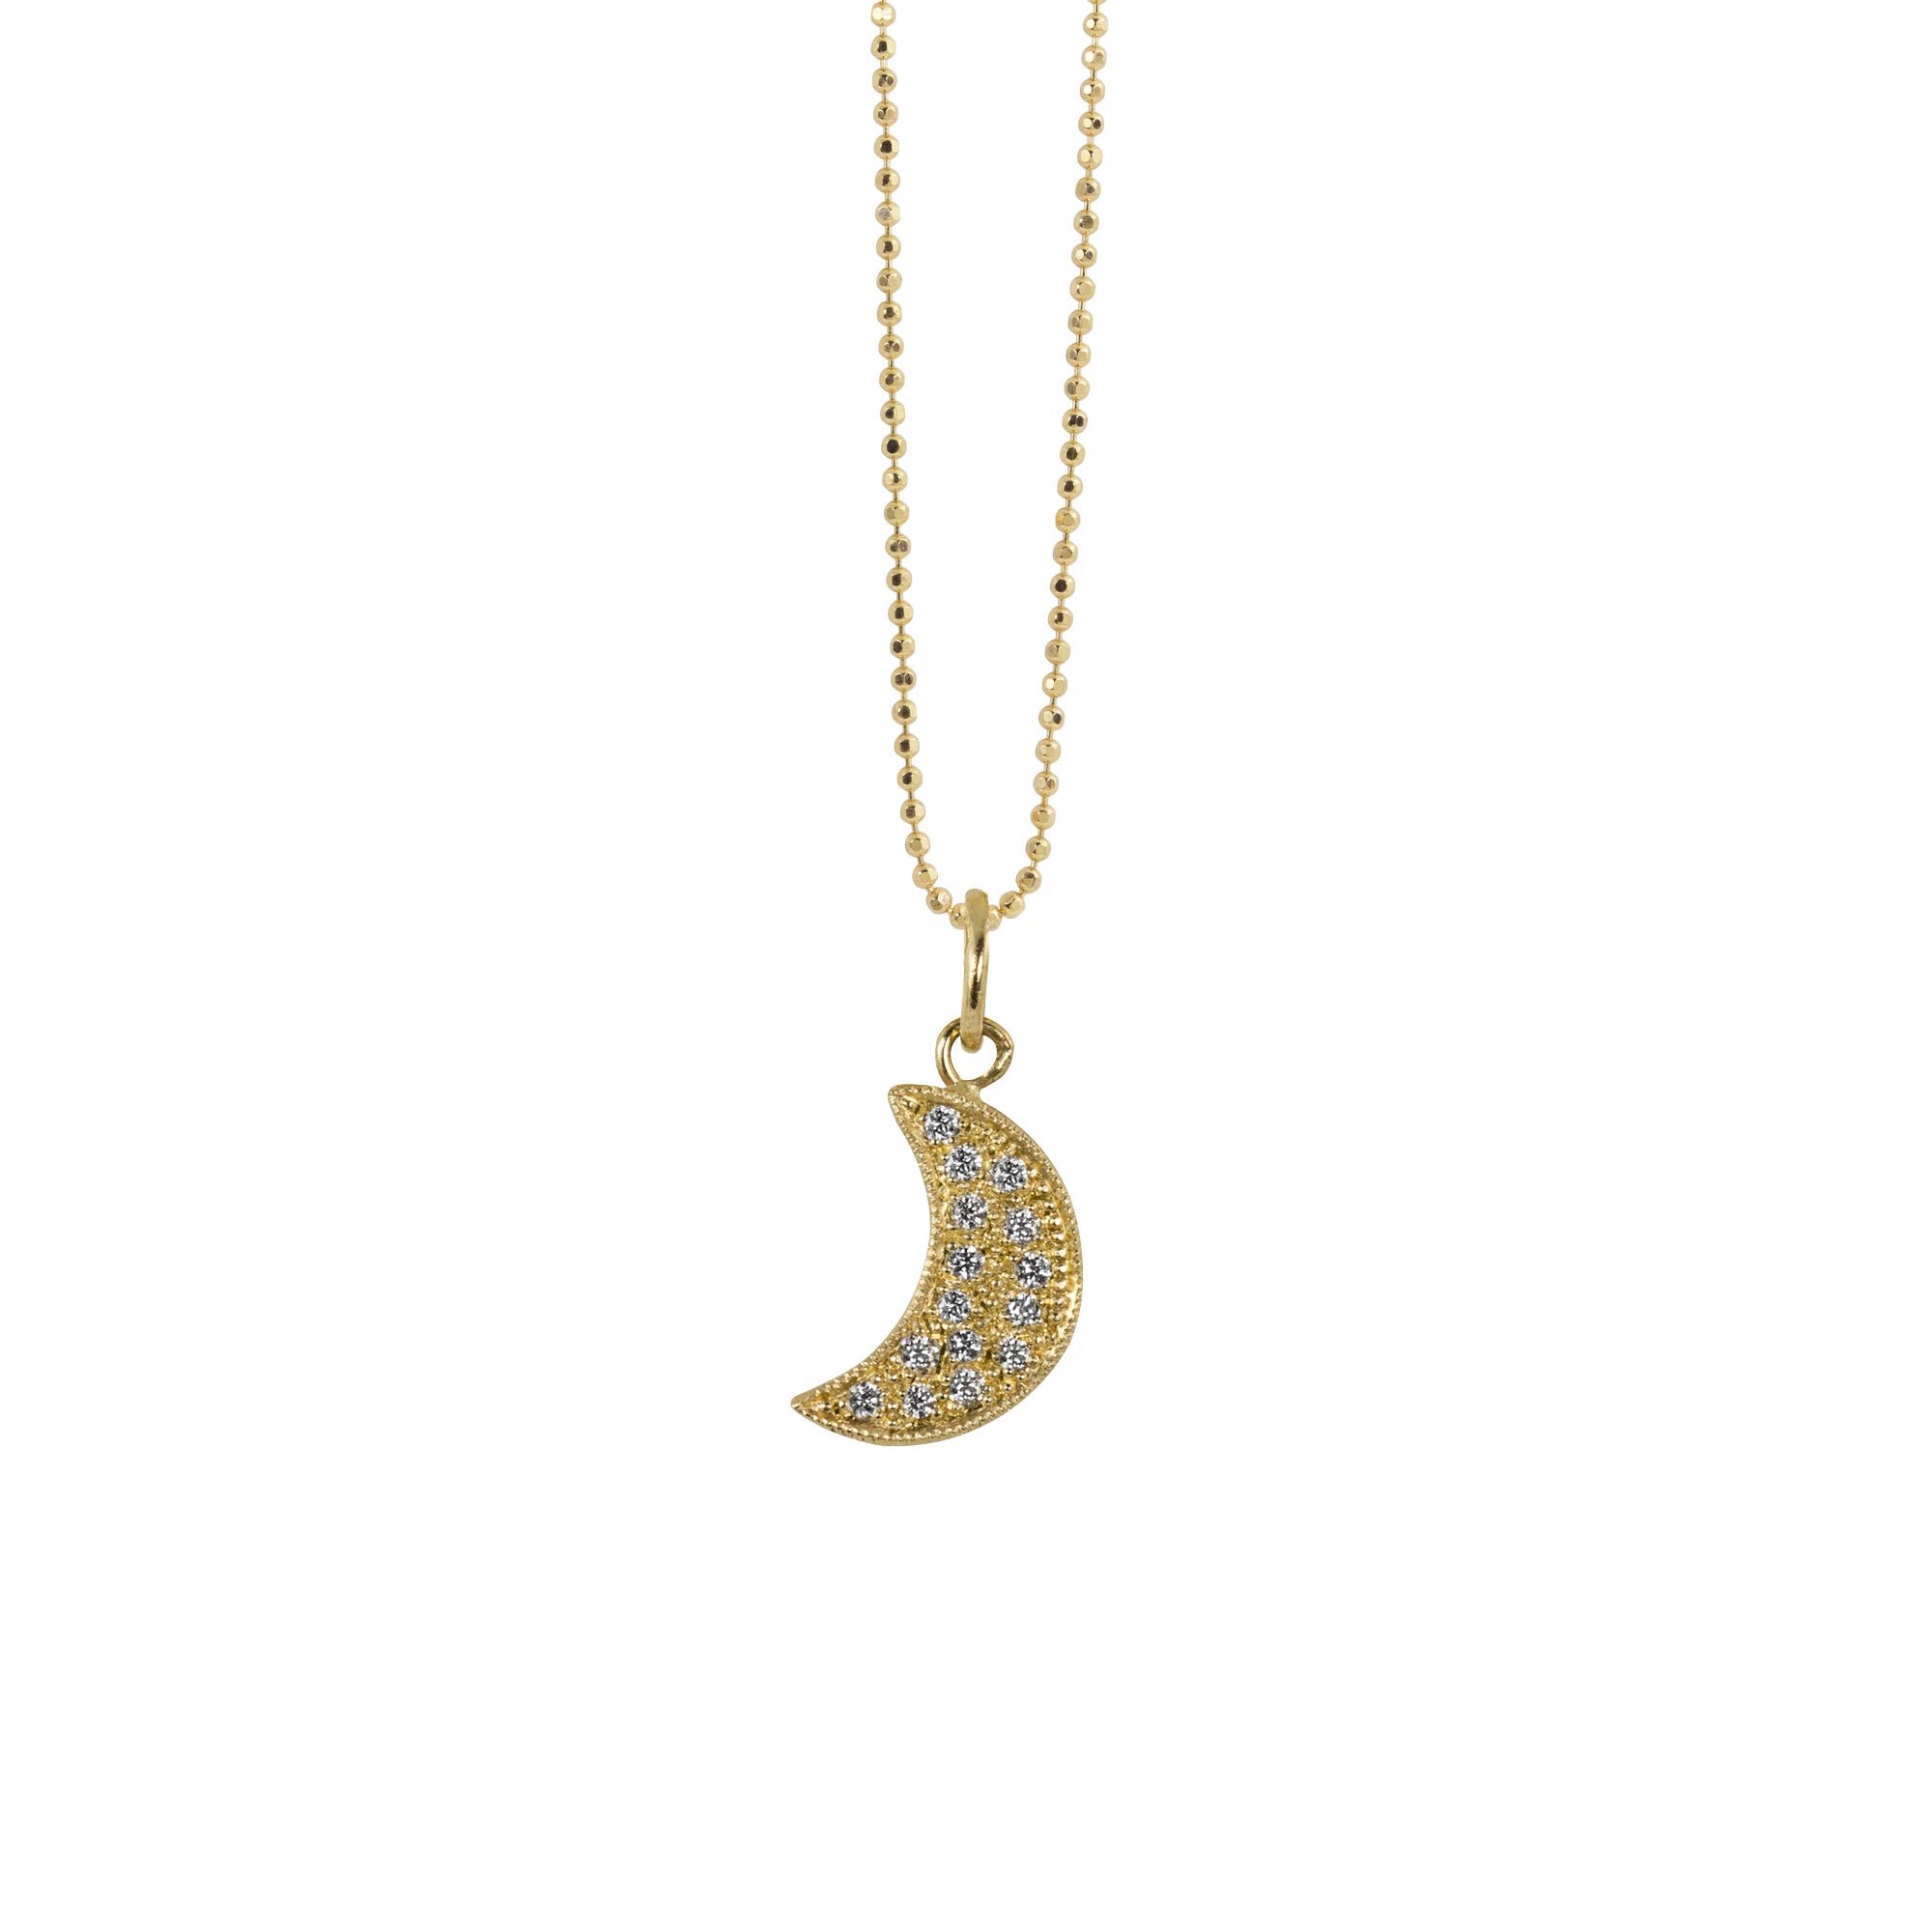 14k yellow gold baby ALER moon charm with scattered diamonds